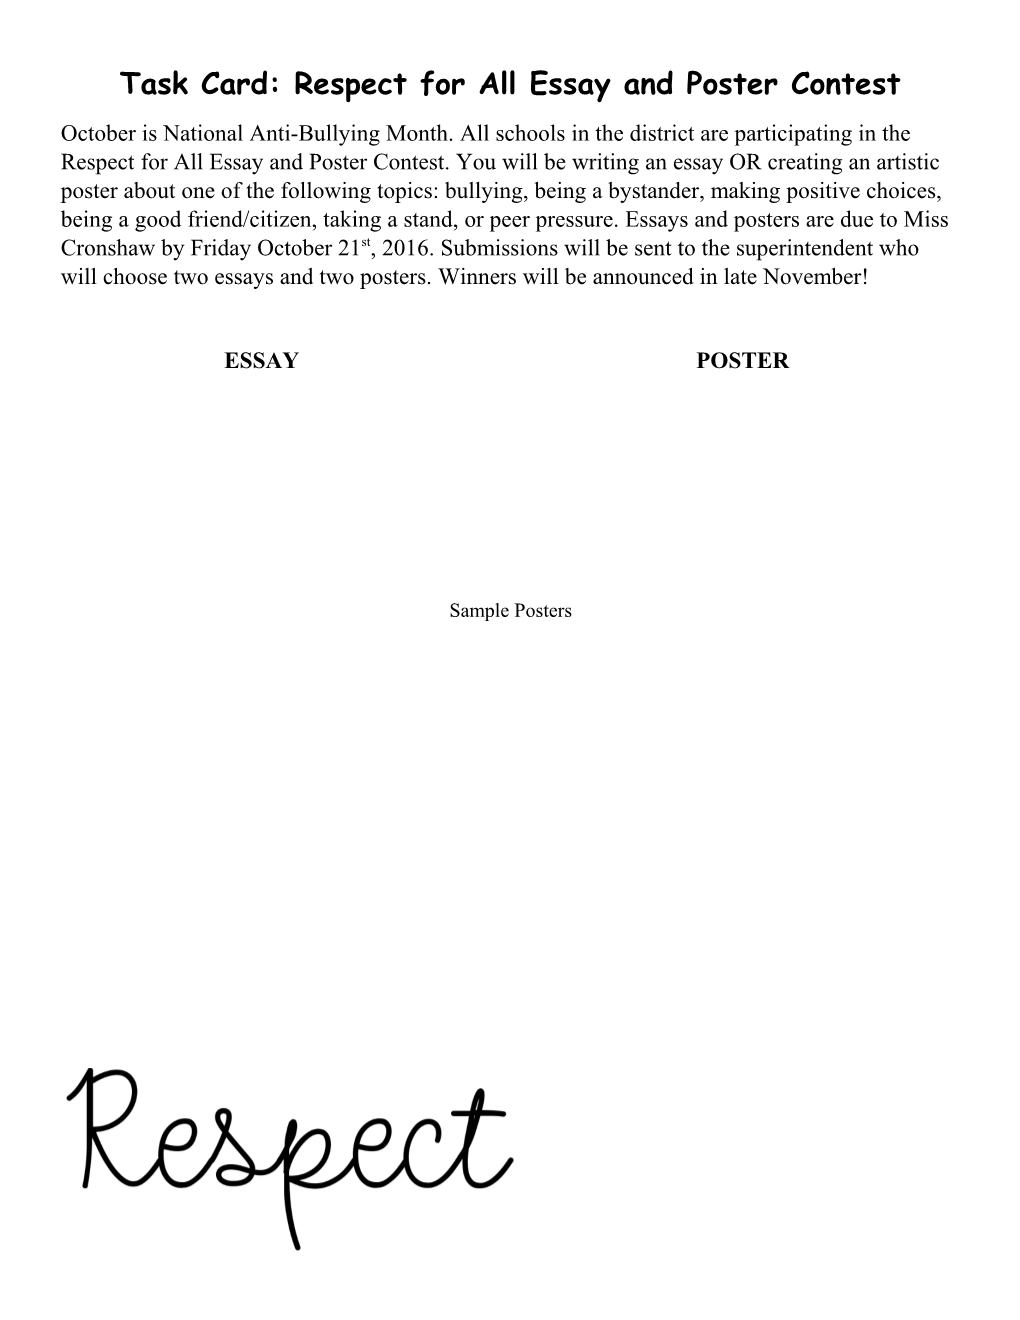 Task Card: Respect for All Essay and Poster Contest